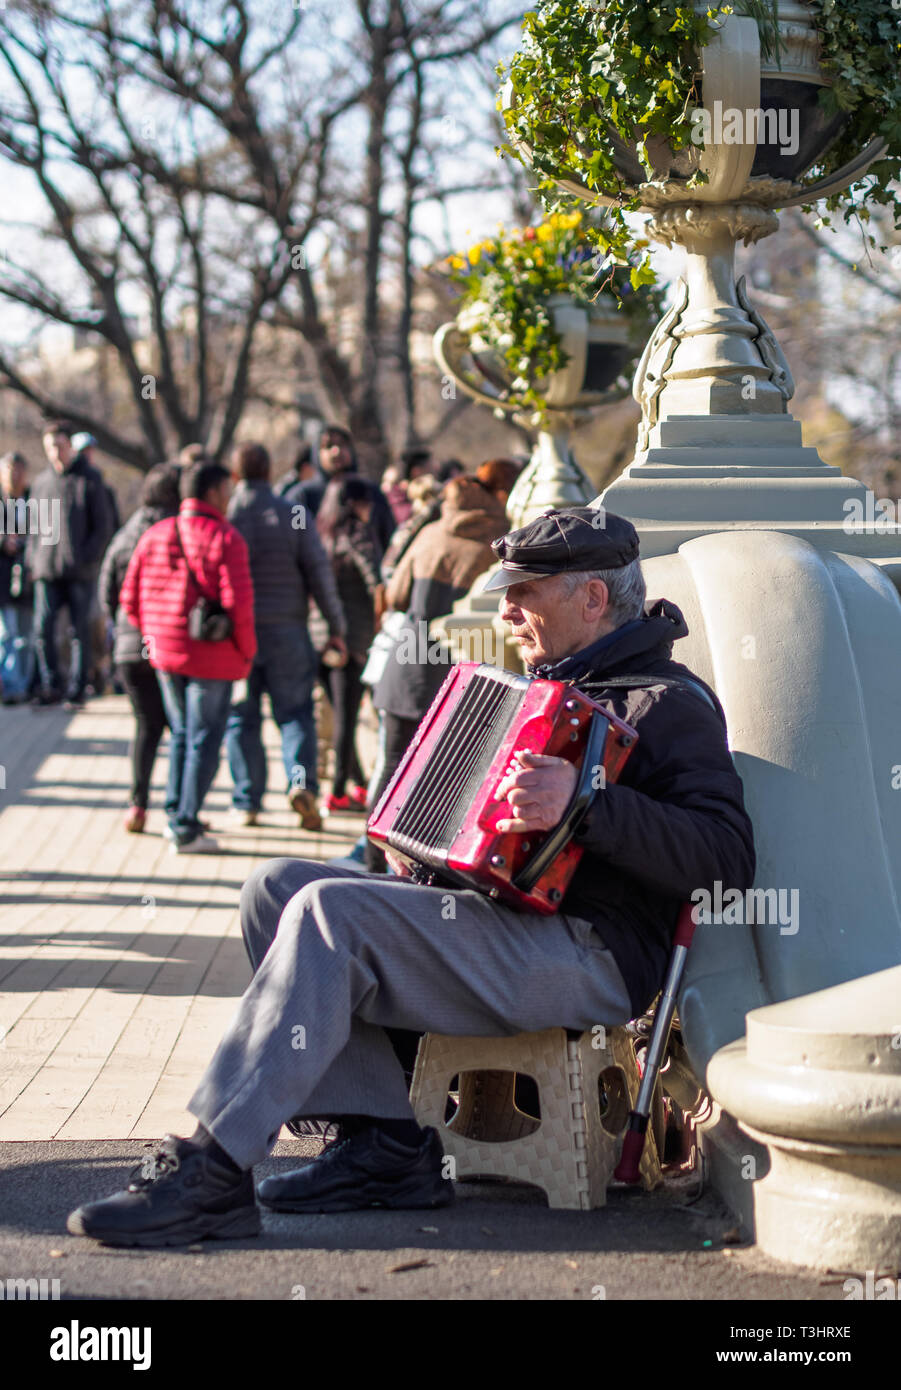 An accordionist playing accordion during a beautiful sunny autumn day at Central Park, New York City, USA Stock Photo